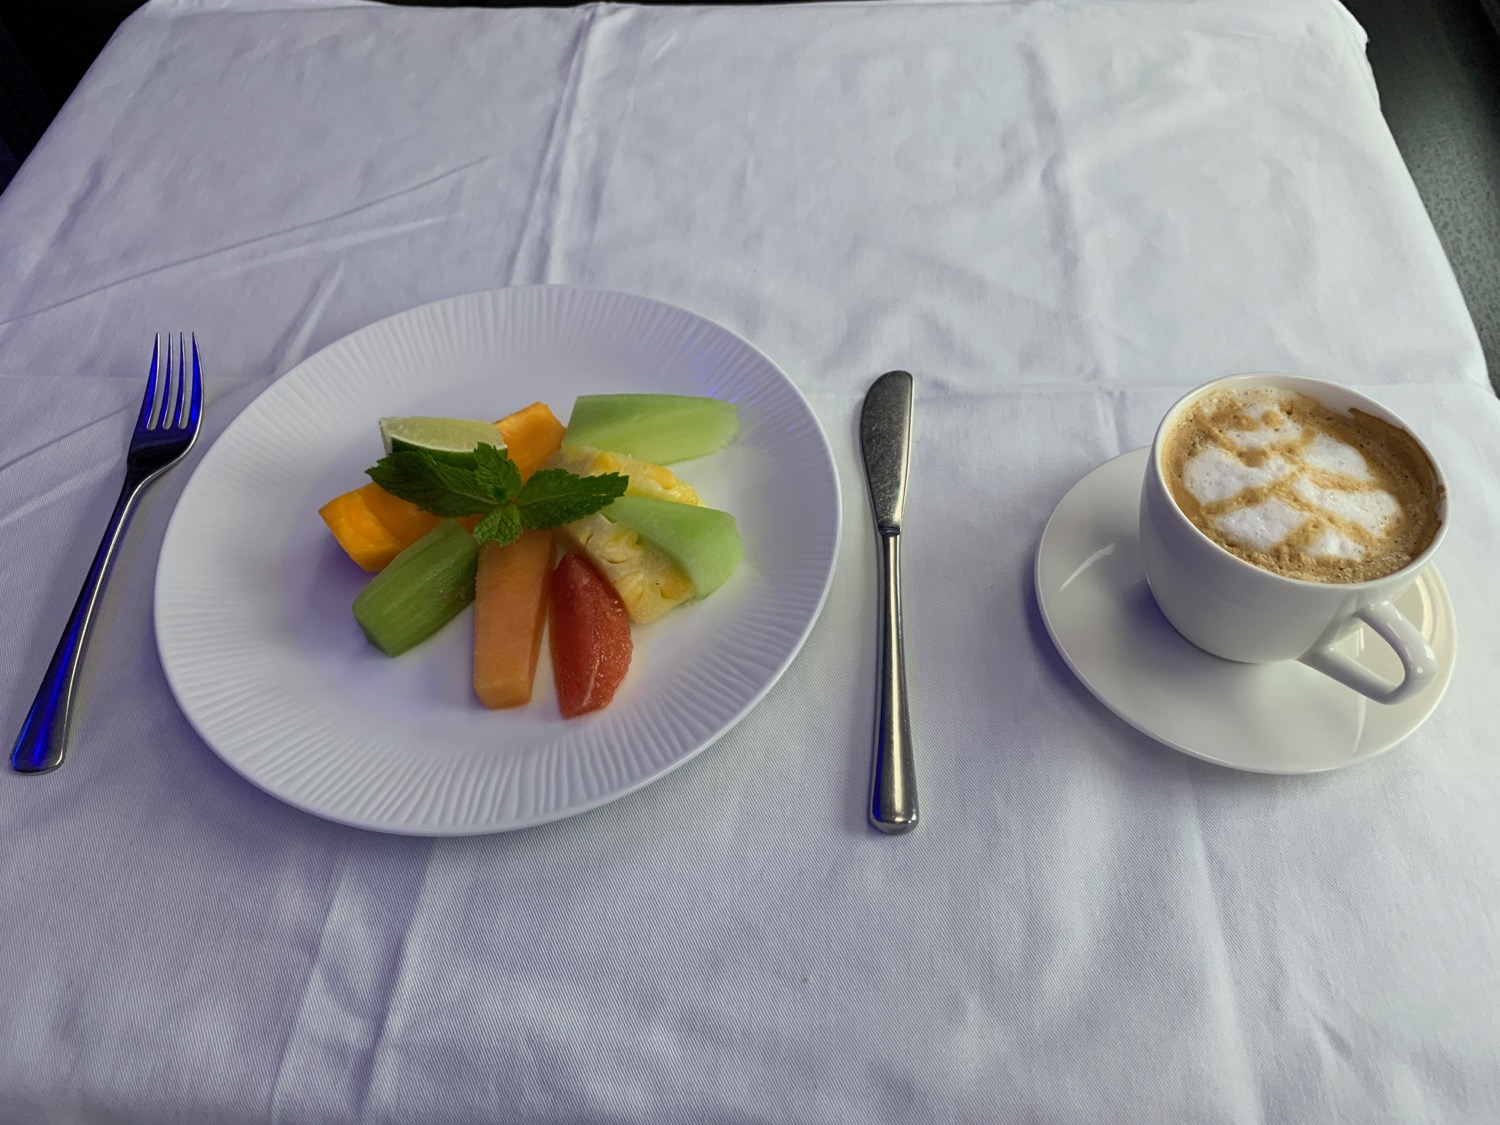 a plate of fruit and a cup of coffee